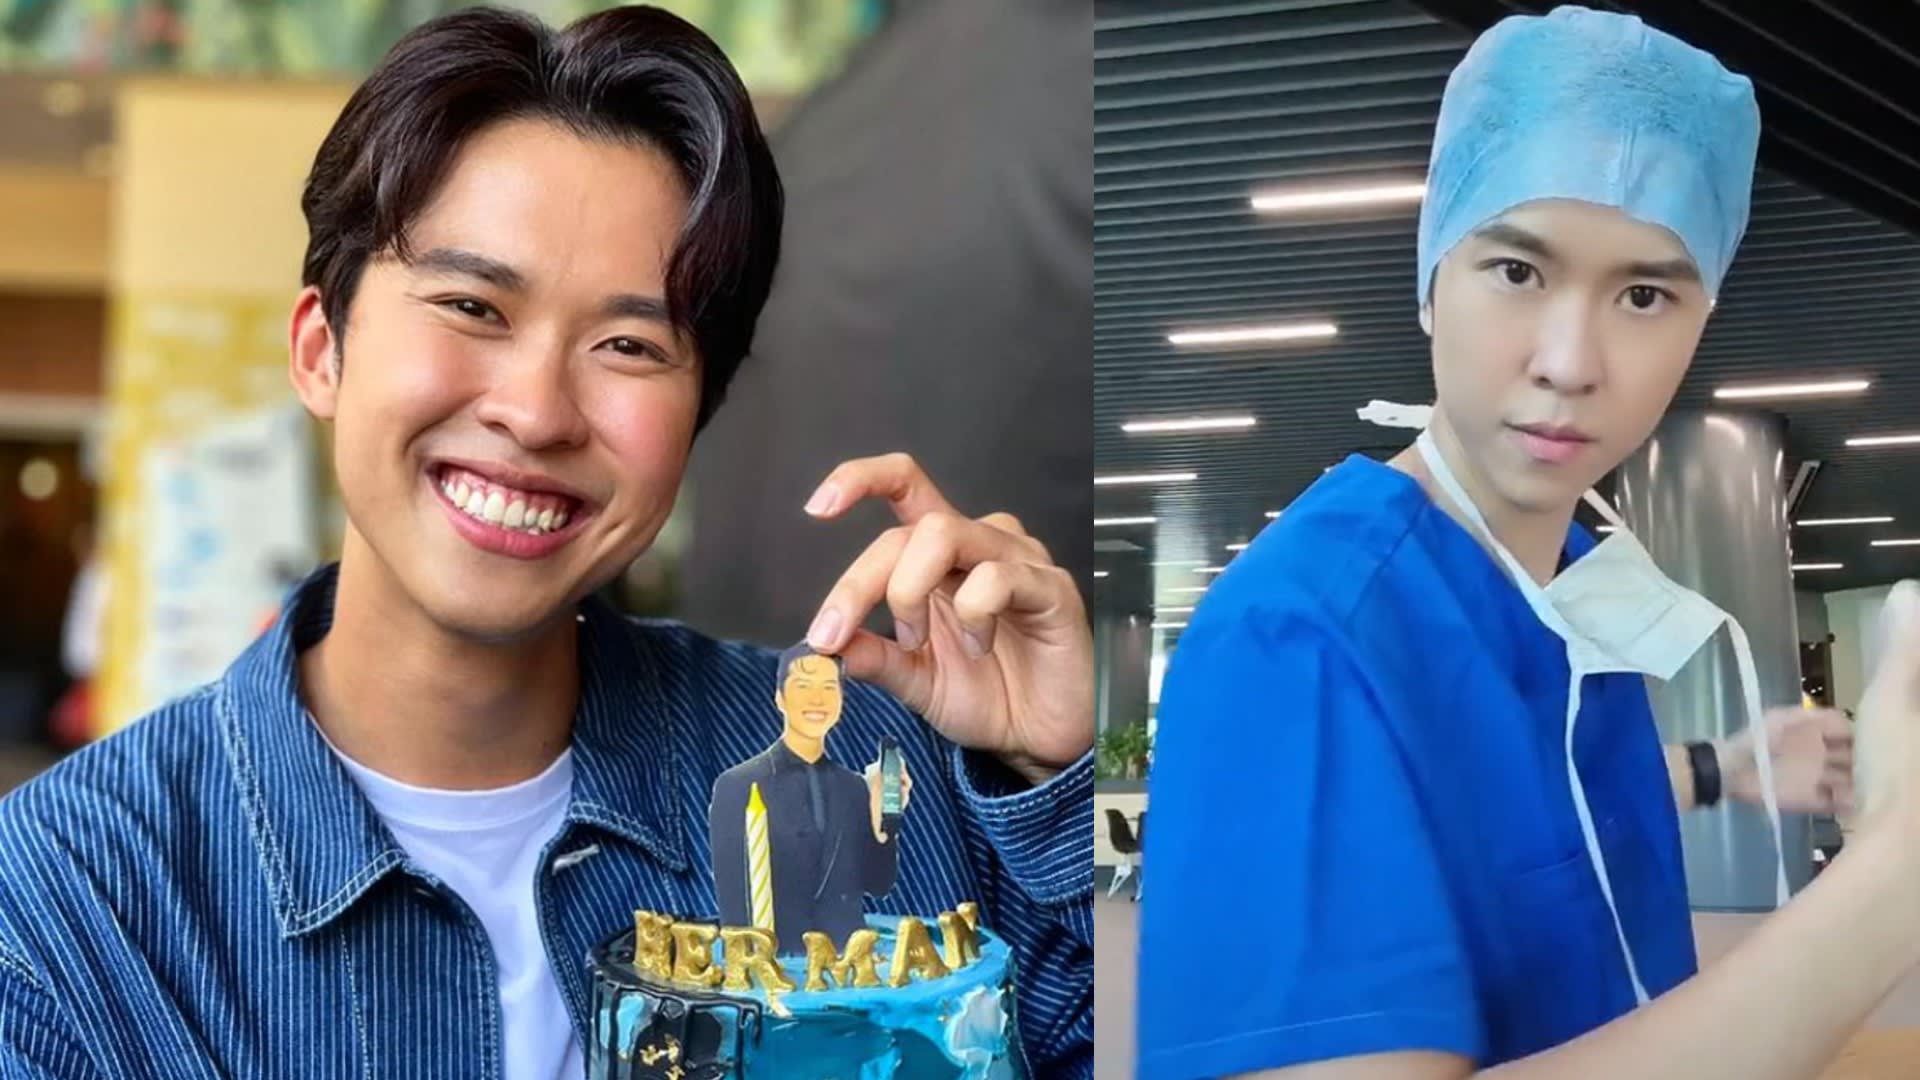 Mediacorp Actor Herman Keh, Whose Recent TikTok Got Over 16 Million Views, Says He’s Okay With Being Known As ‘The TikTok Guy’… For Now